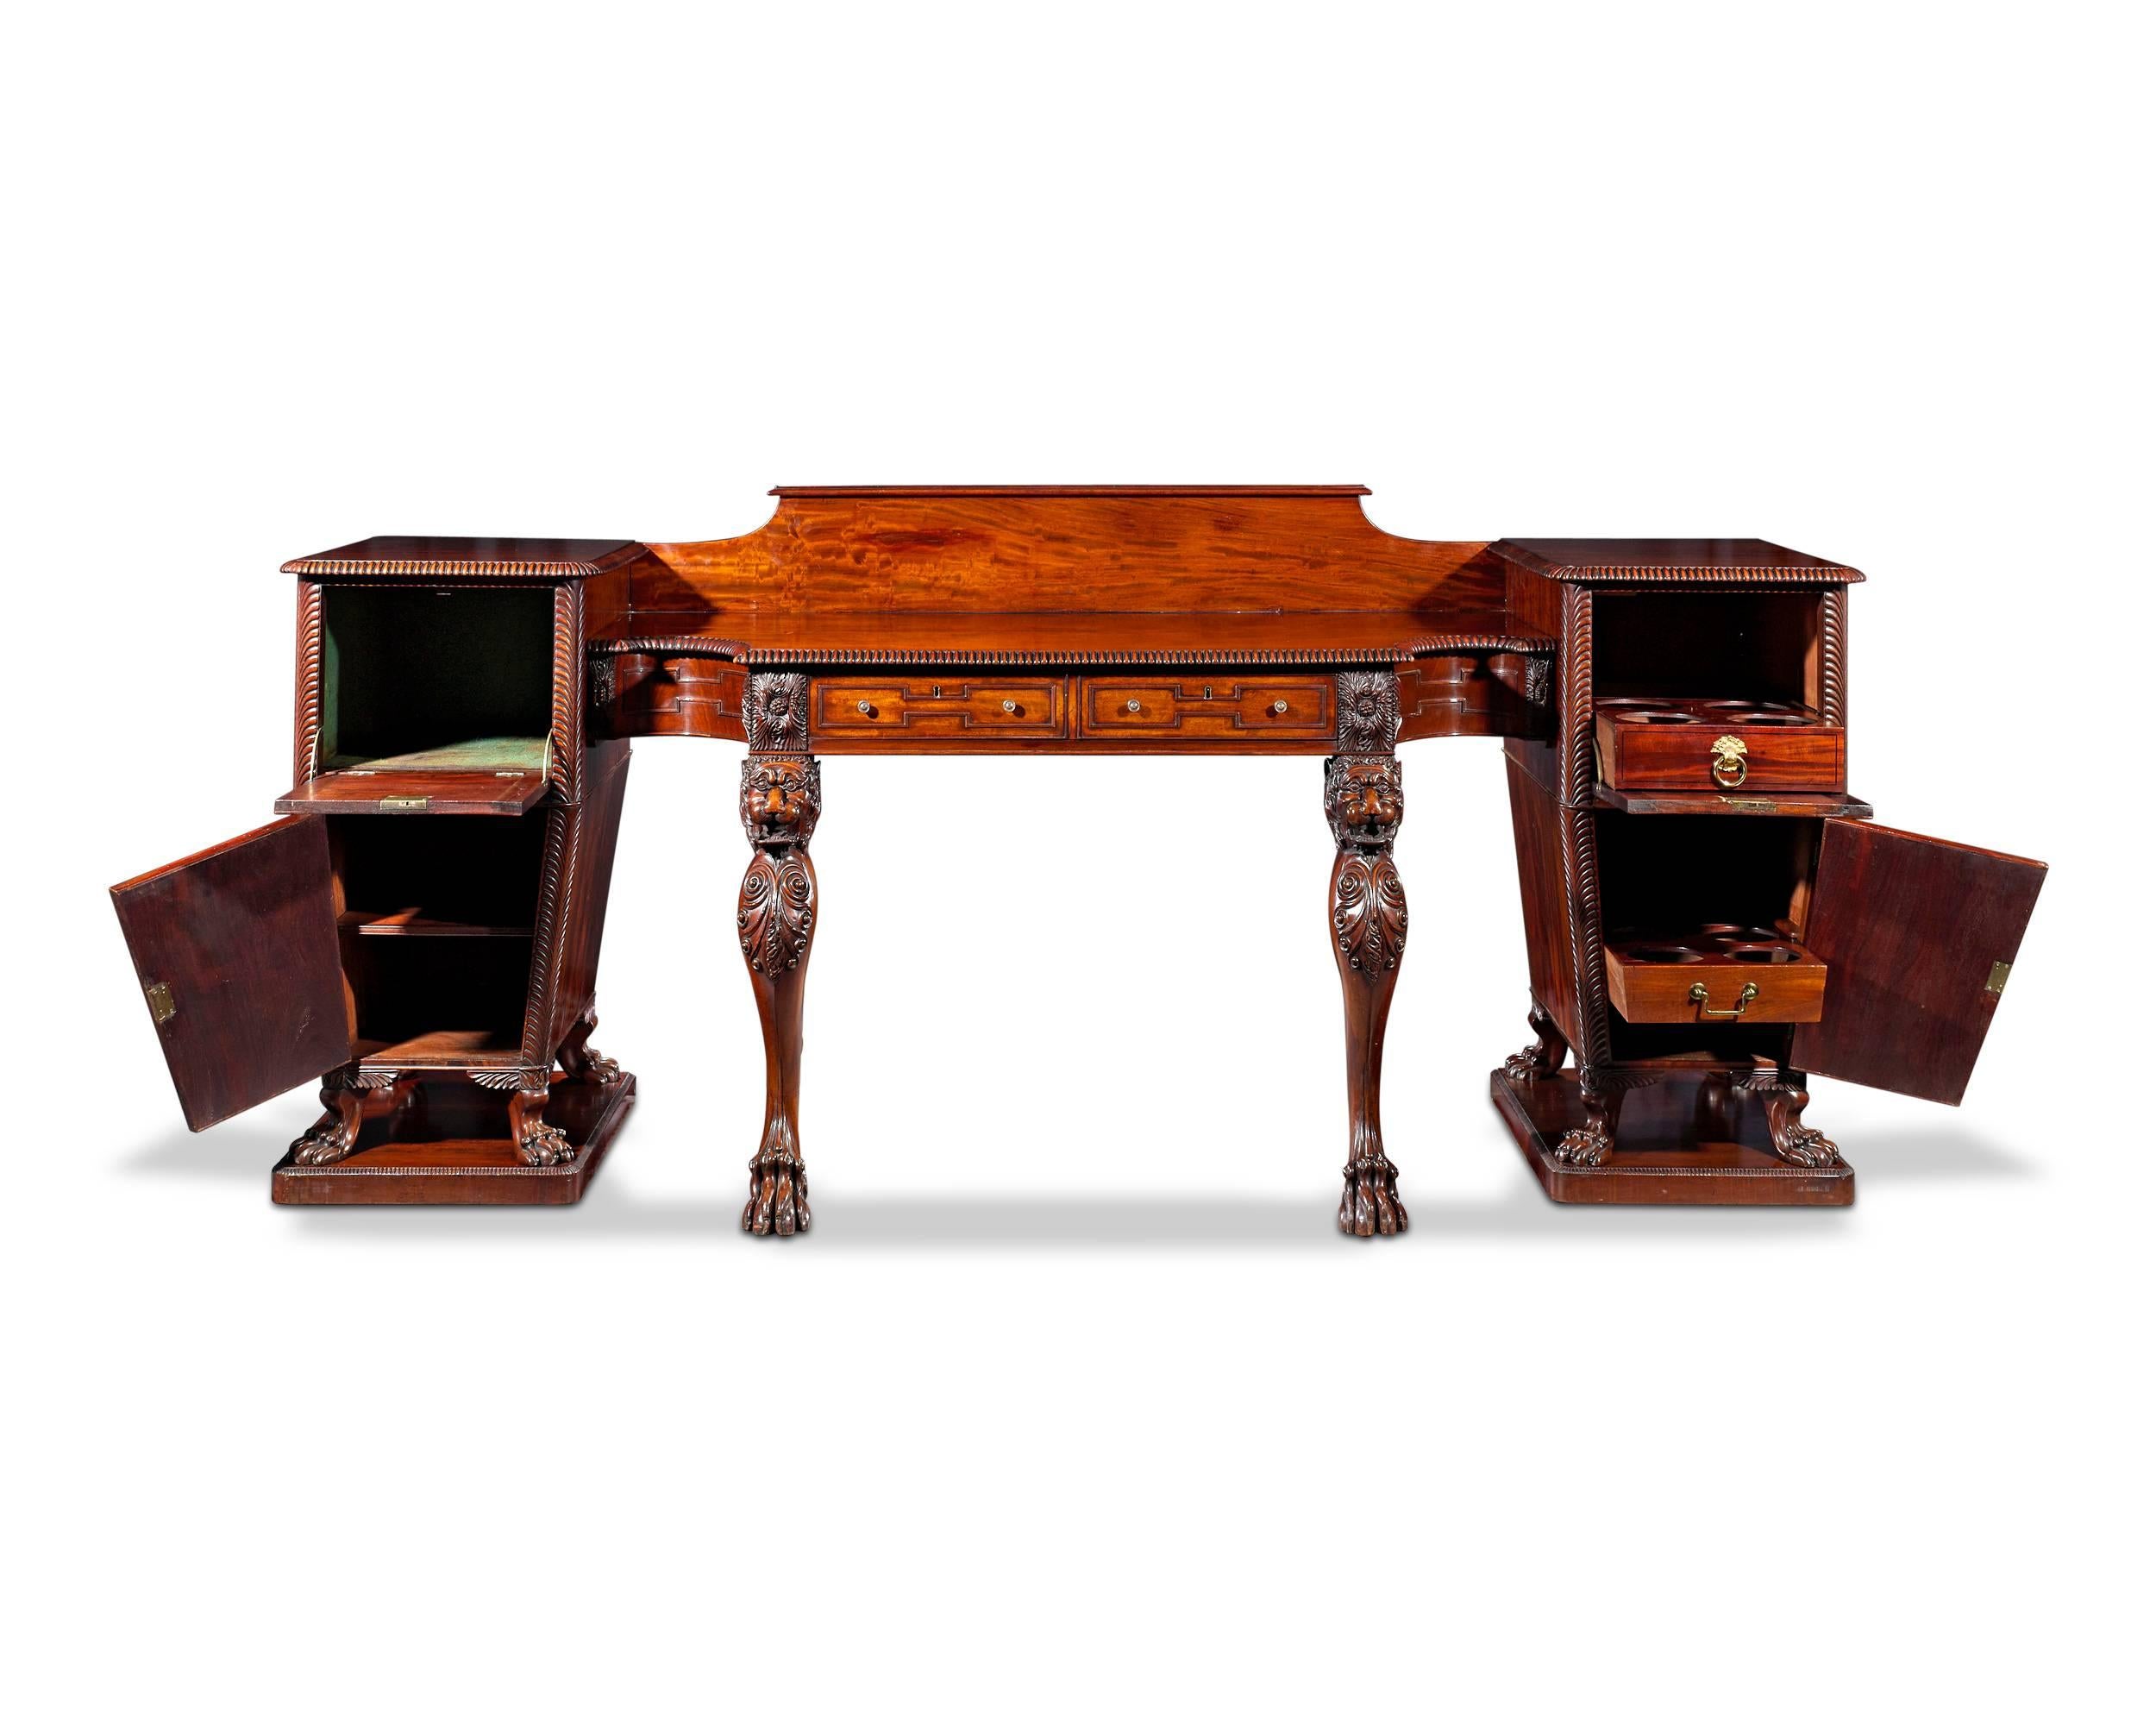 Wonderfully proportioned with a distinctive and skillfully executed lion motif is this incredible, early 19th century mahogany pedestal sideboard. This rare and resplendent specimen of Regency-era cabinetmaking would have been utilized in the dining